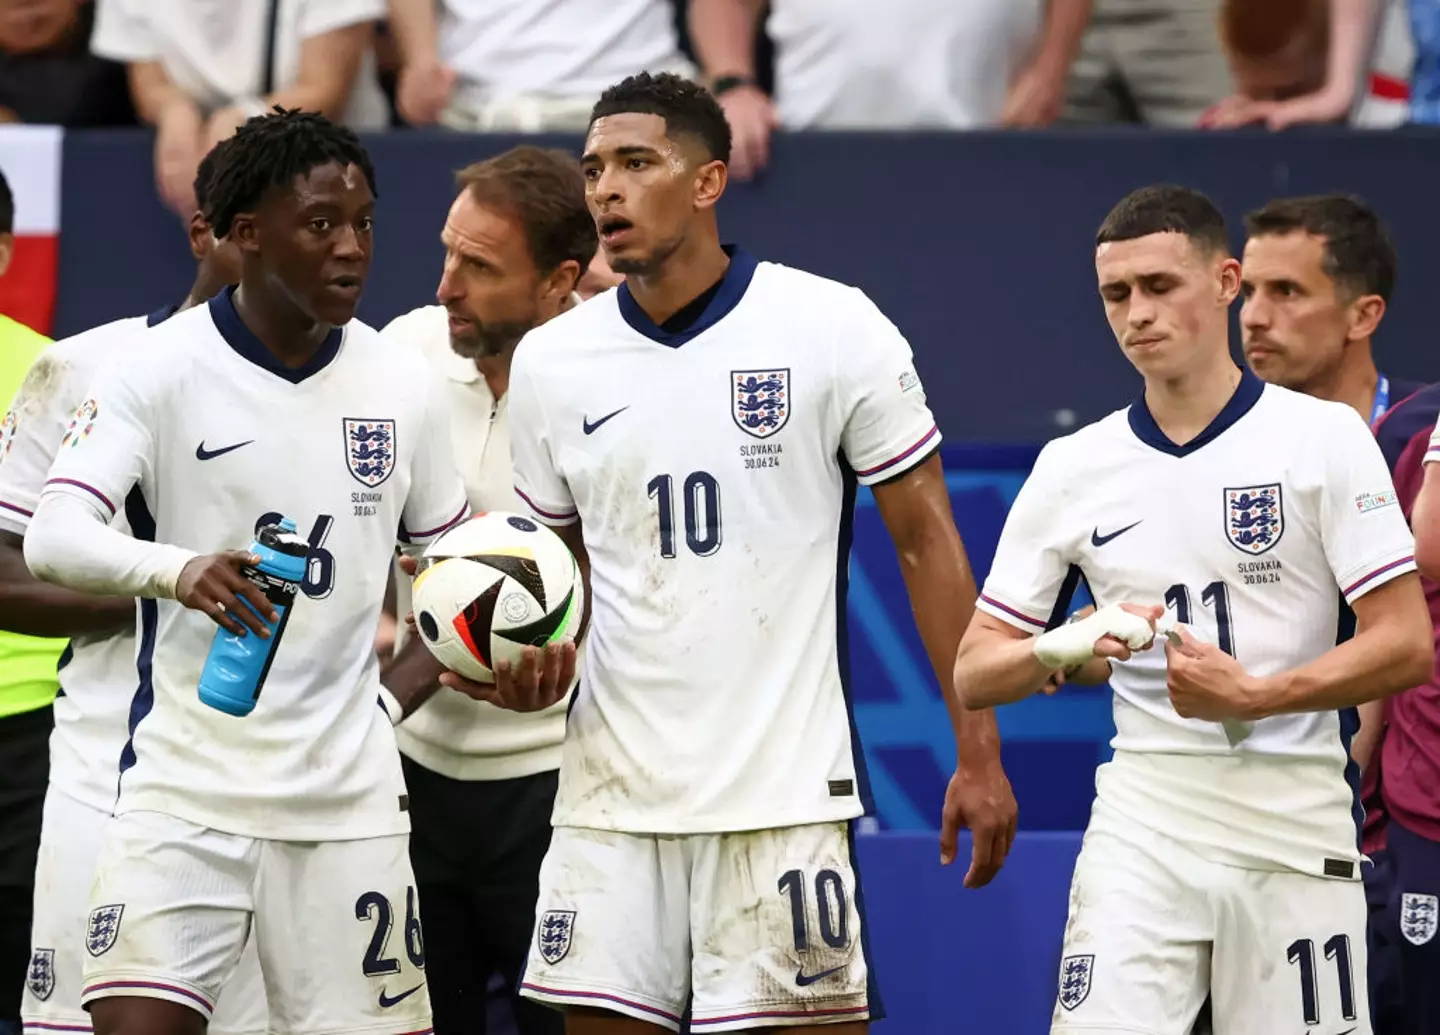 Bellingham and Foden could play as two No 10s (Image: Getty)